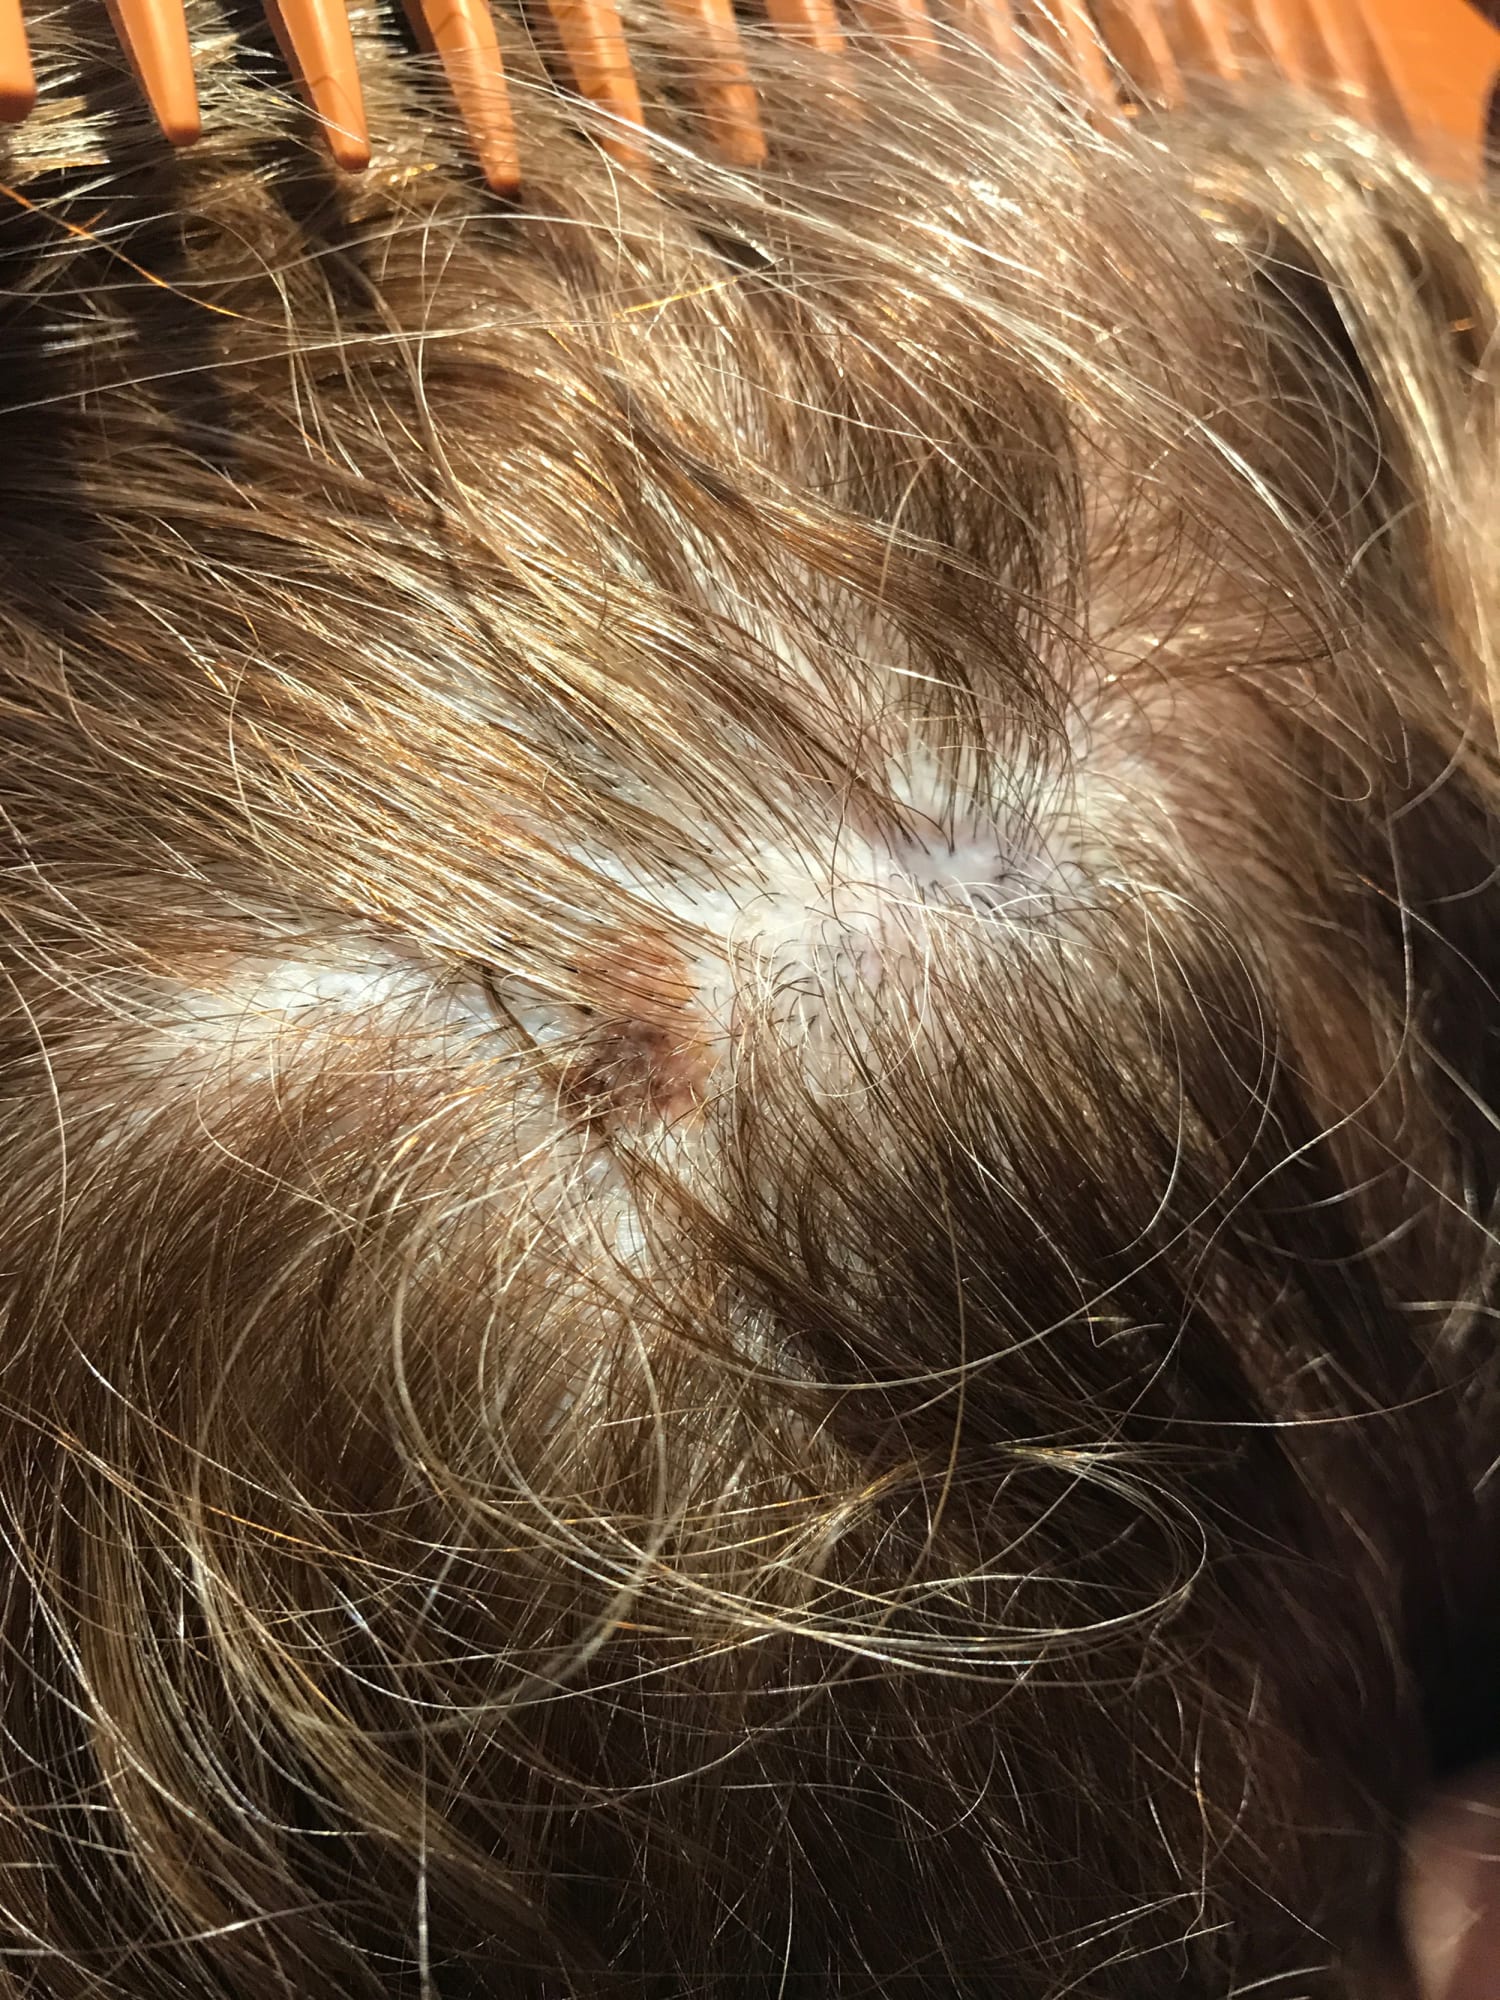 Don't forget to check your scalp for melanoma skin cancer